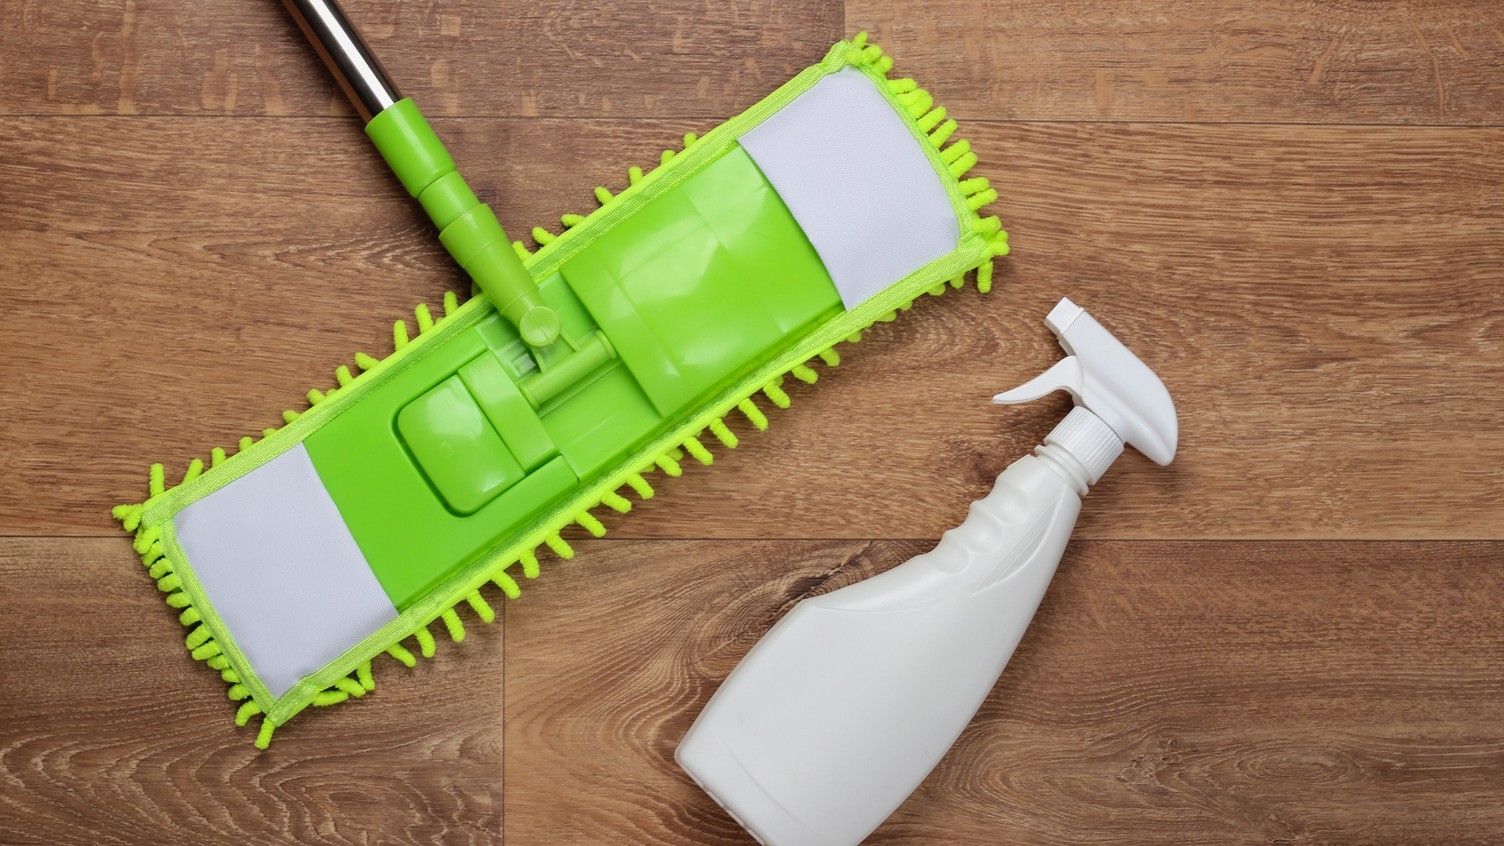 Microfiber mop and cleaner